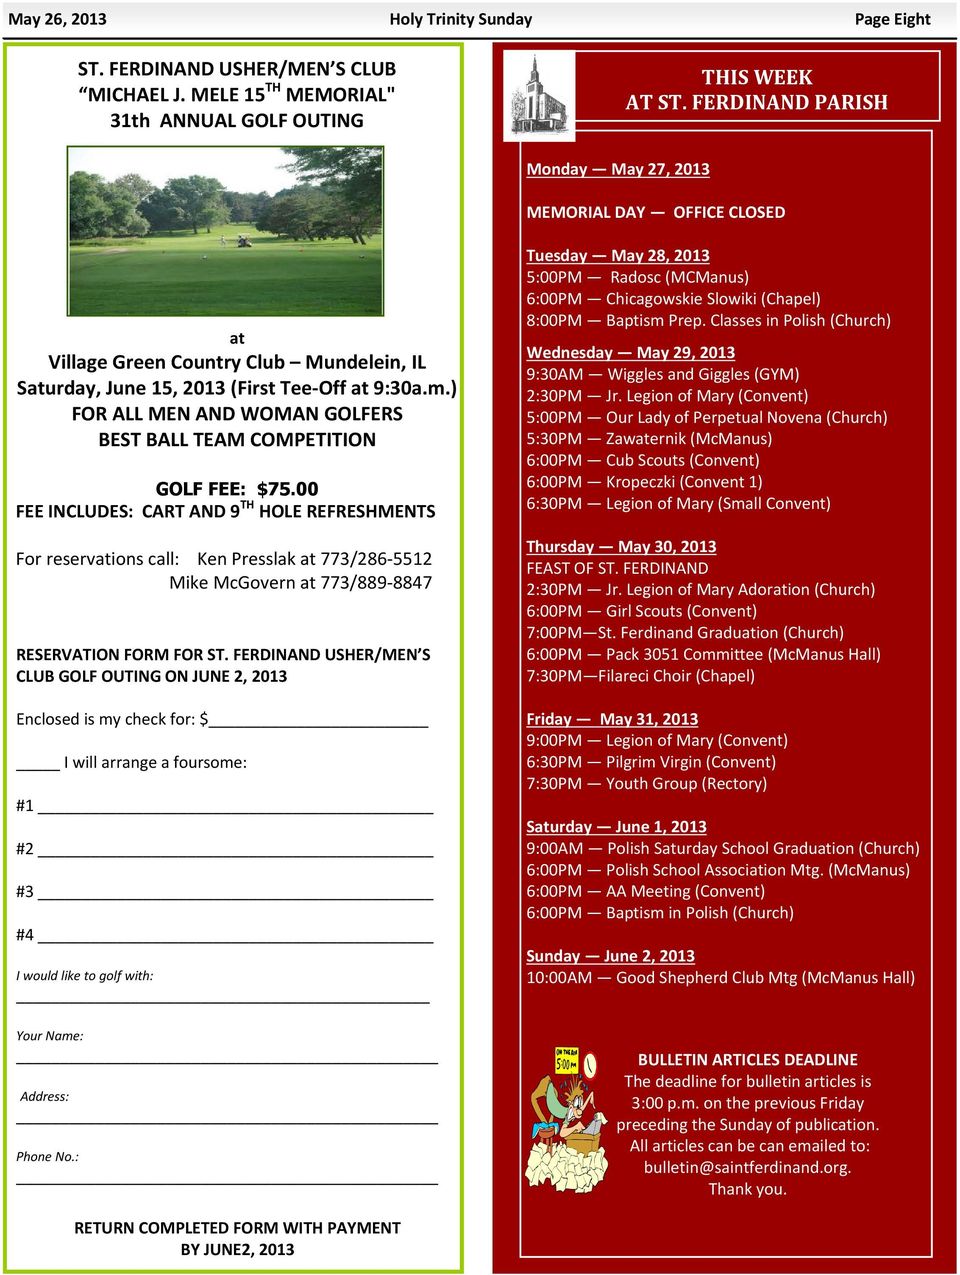 ) FOR ALL MEN AND WOMAN GOLFERS BEST BALL TEAM COMPETITION GOLF FEE: $75.